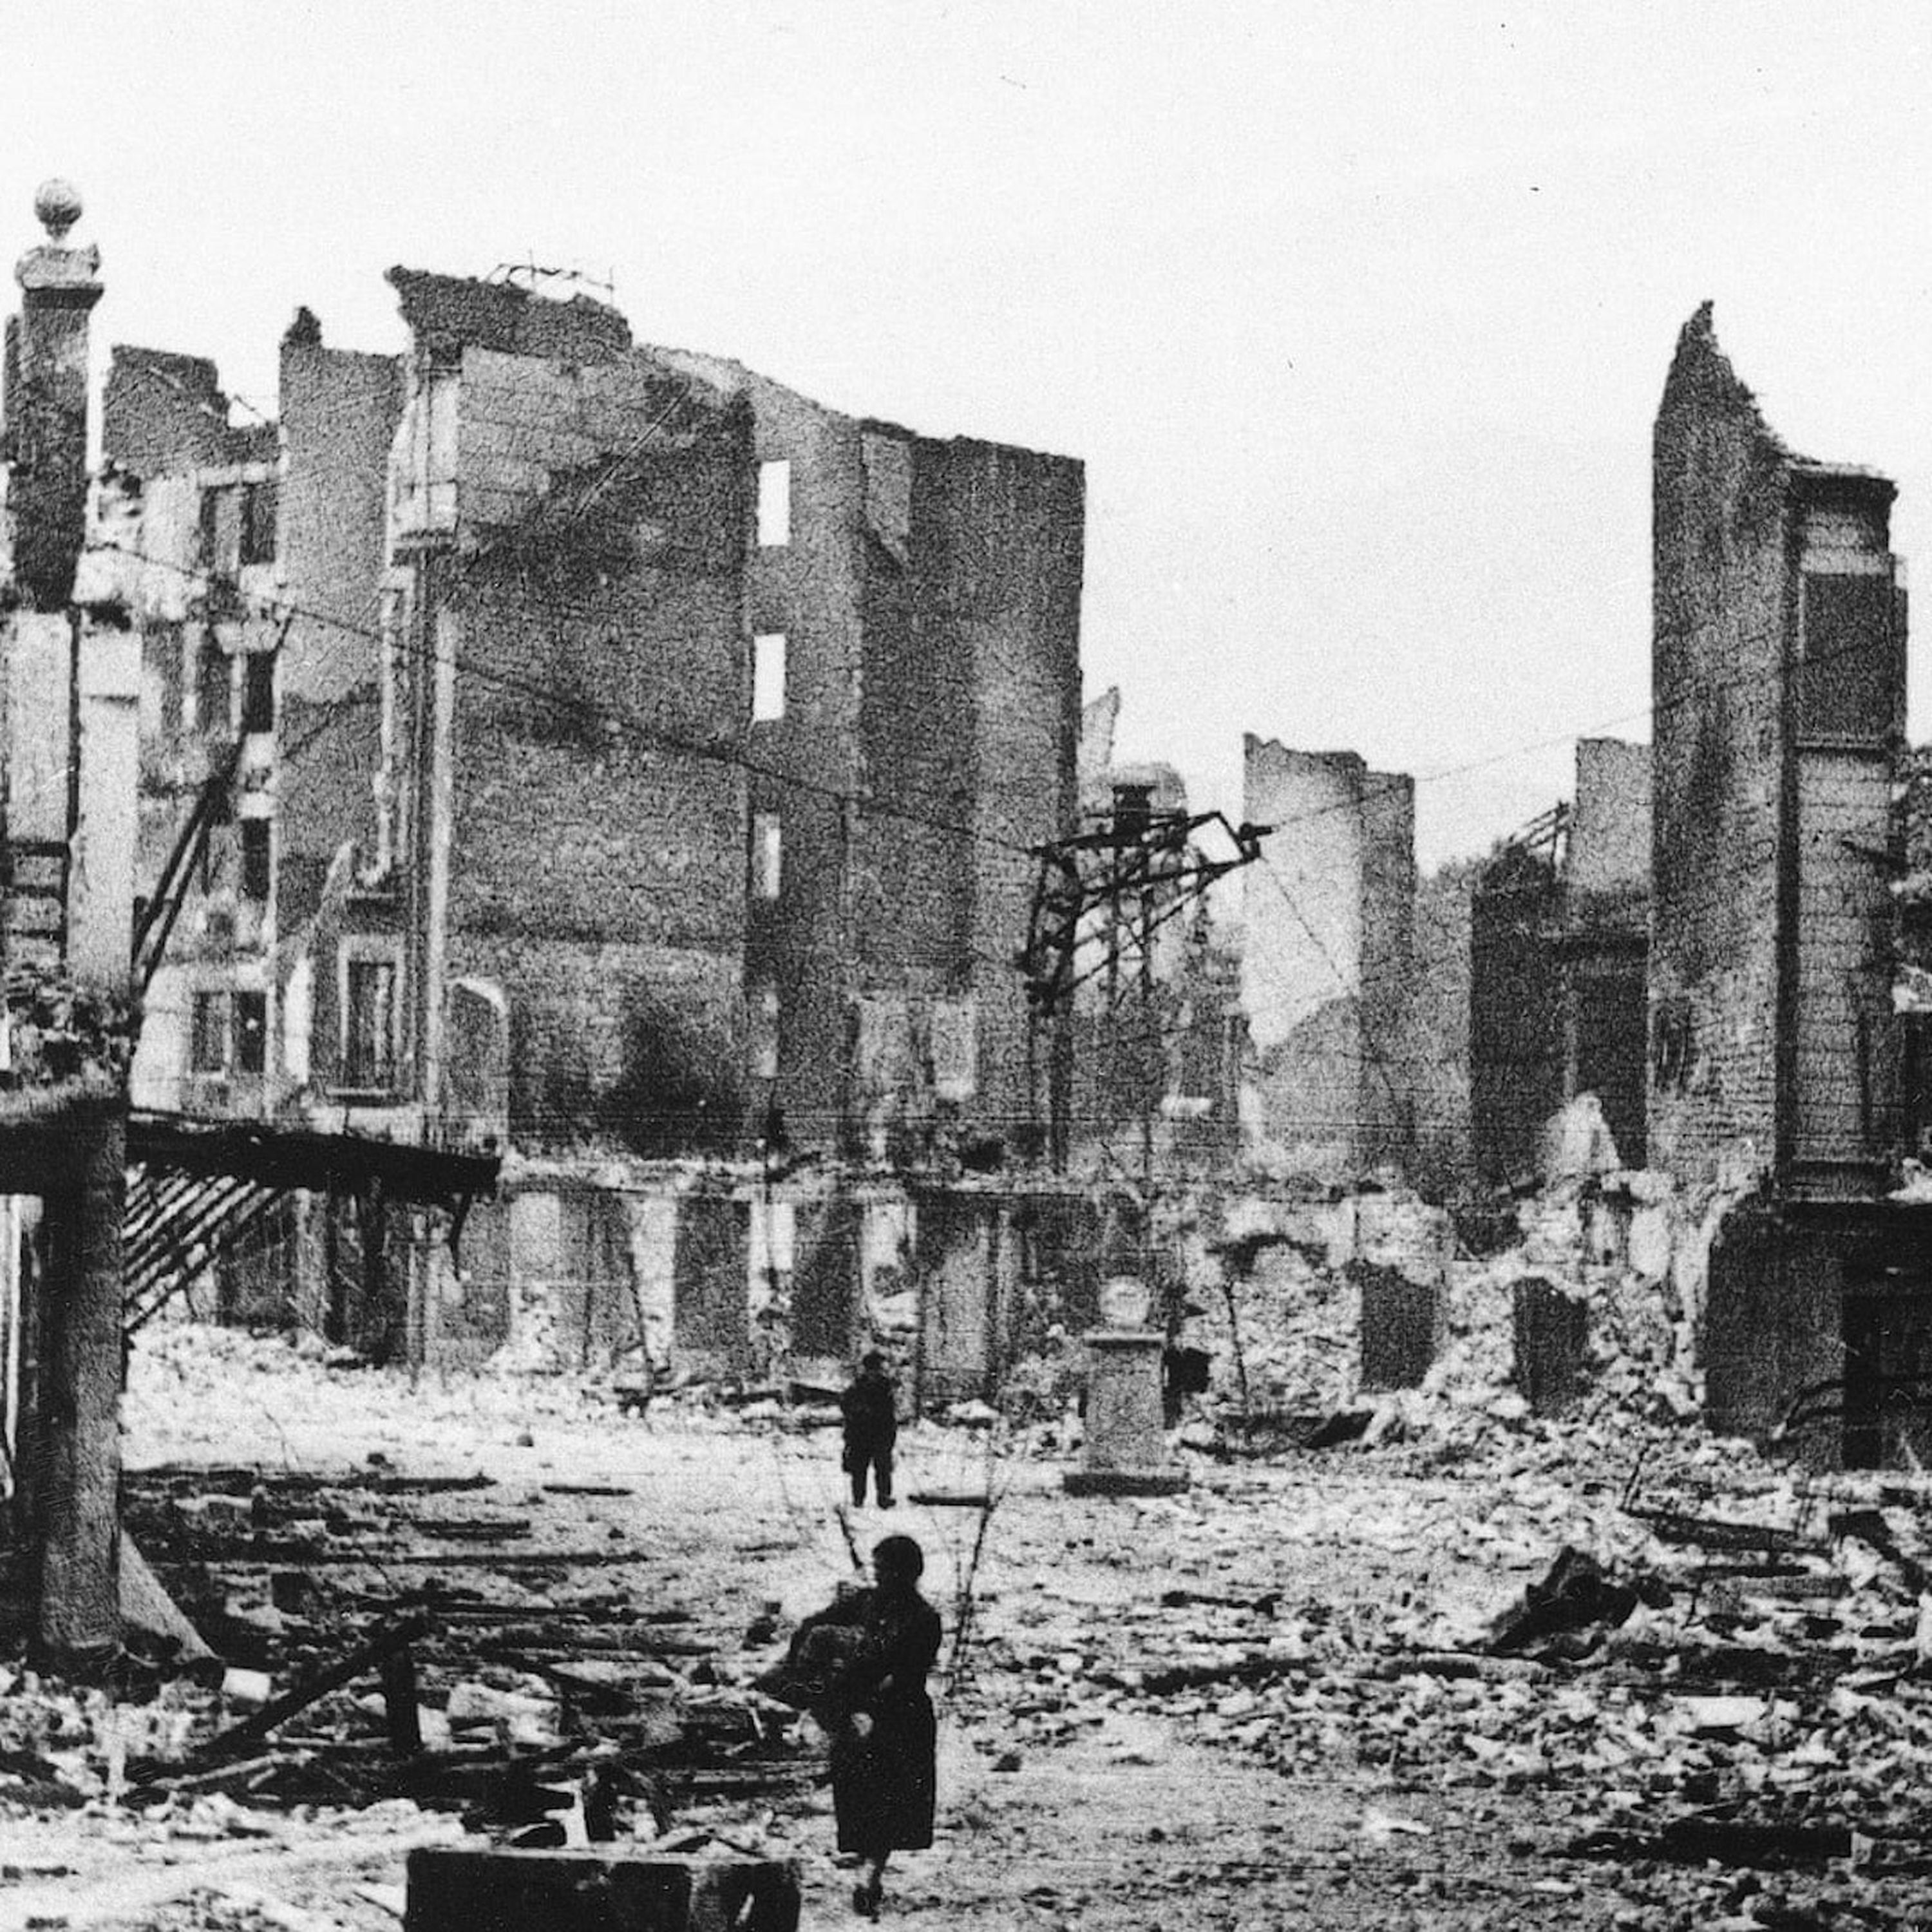 The Bombing of Guernica & the War in the North (Partisans VII)